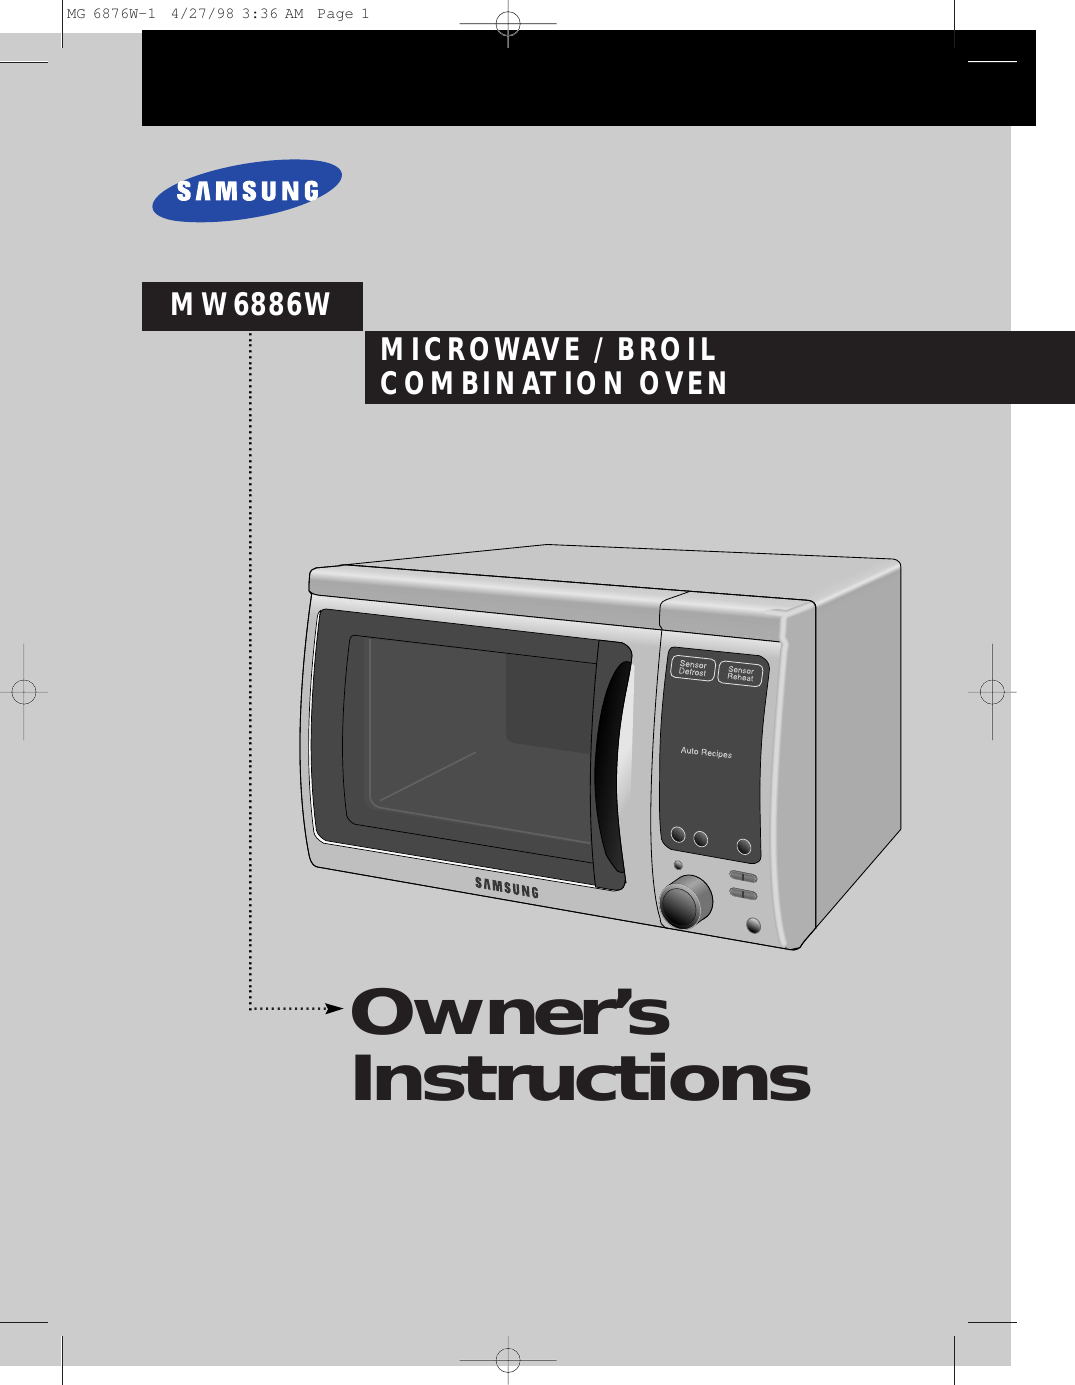 .............Owner’s InstructionsMICROWAVE / BROILCOMBINATION OVENMW6886W......................................................................................................................MG 6876W-1  4/27/98 3:36 AM  Page 1